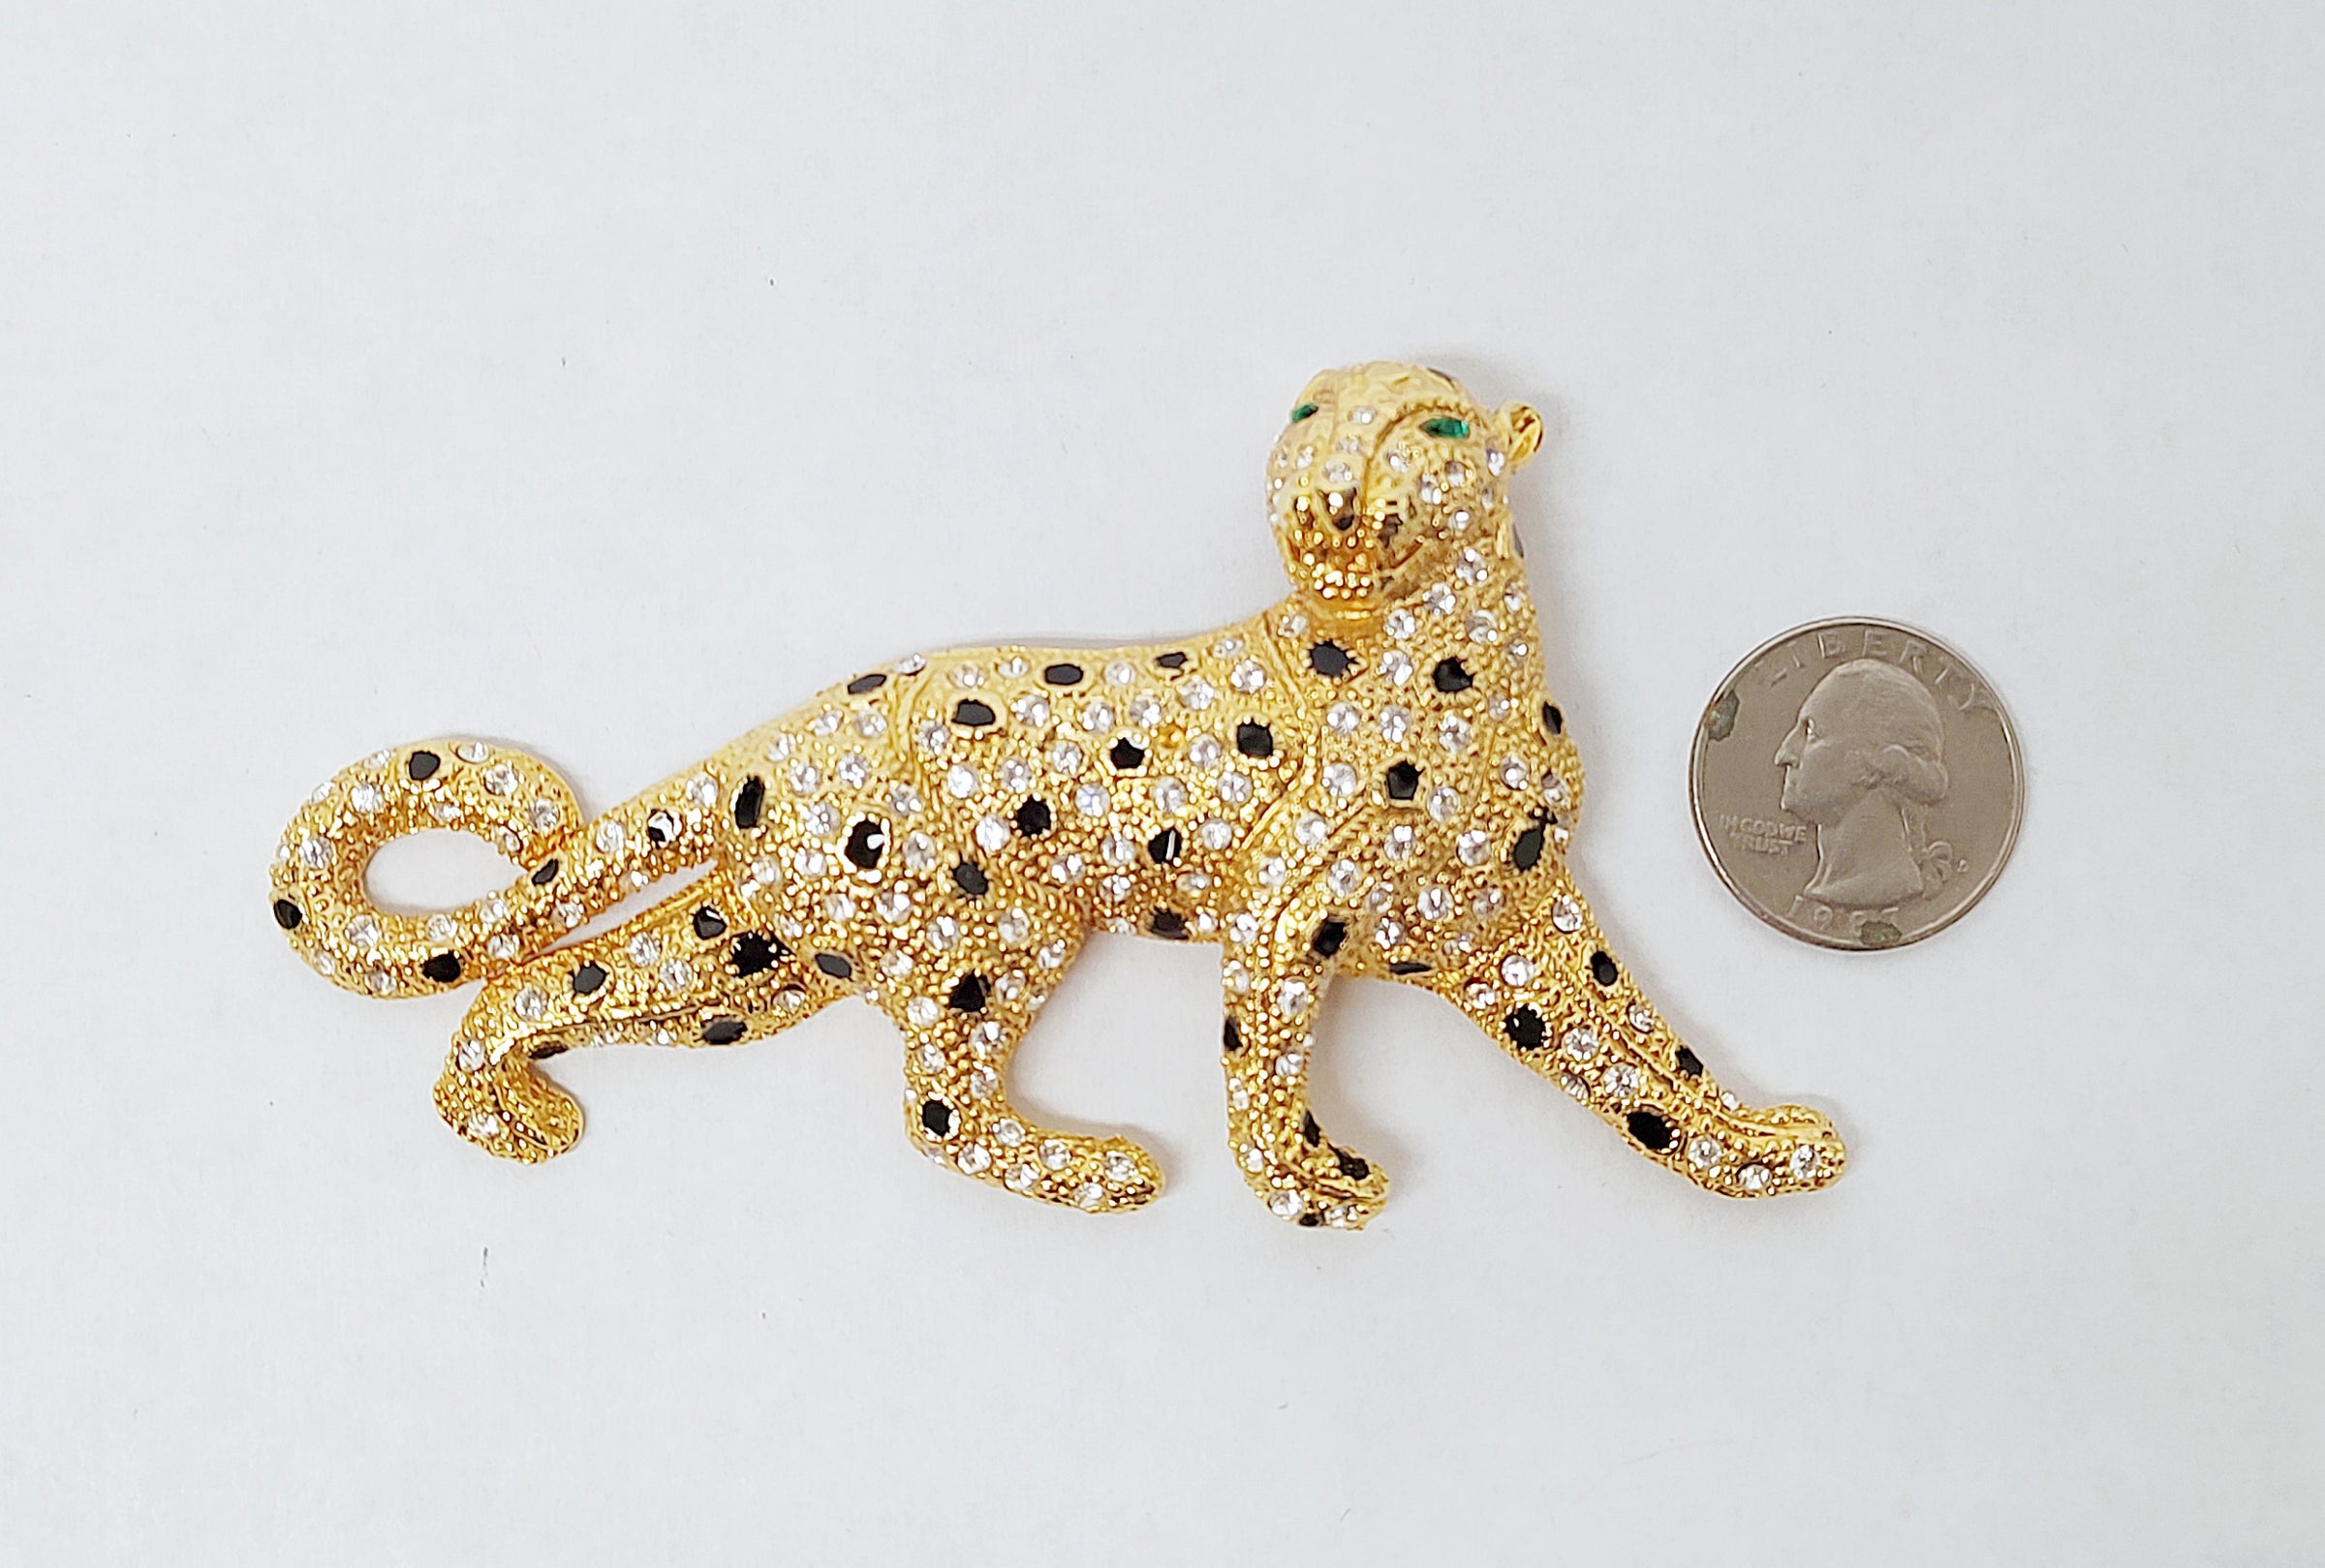 Large Gold Tone Panther Brooch with Rhinestones and Green Eyes - Hers and His Treasures